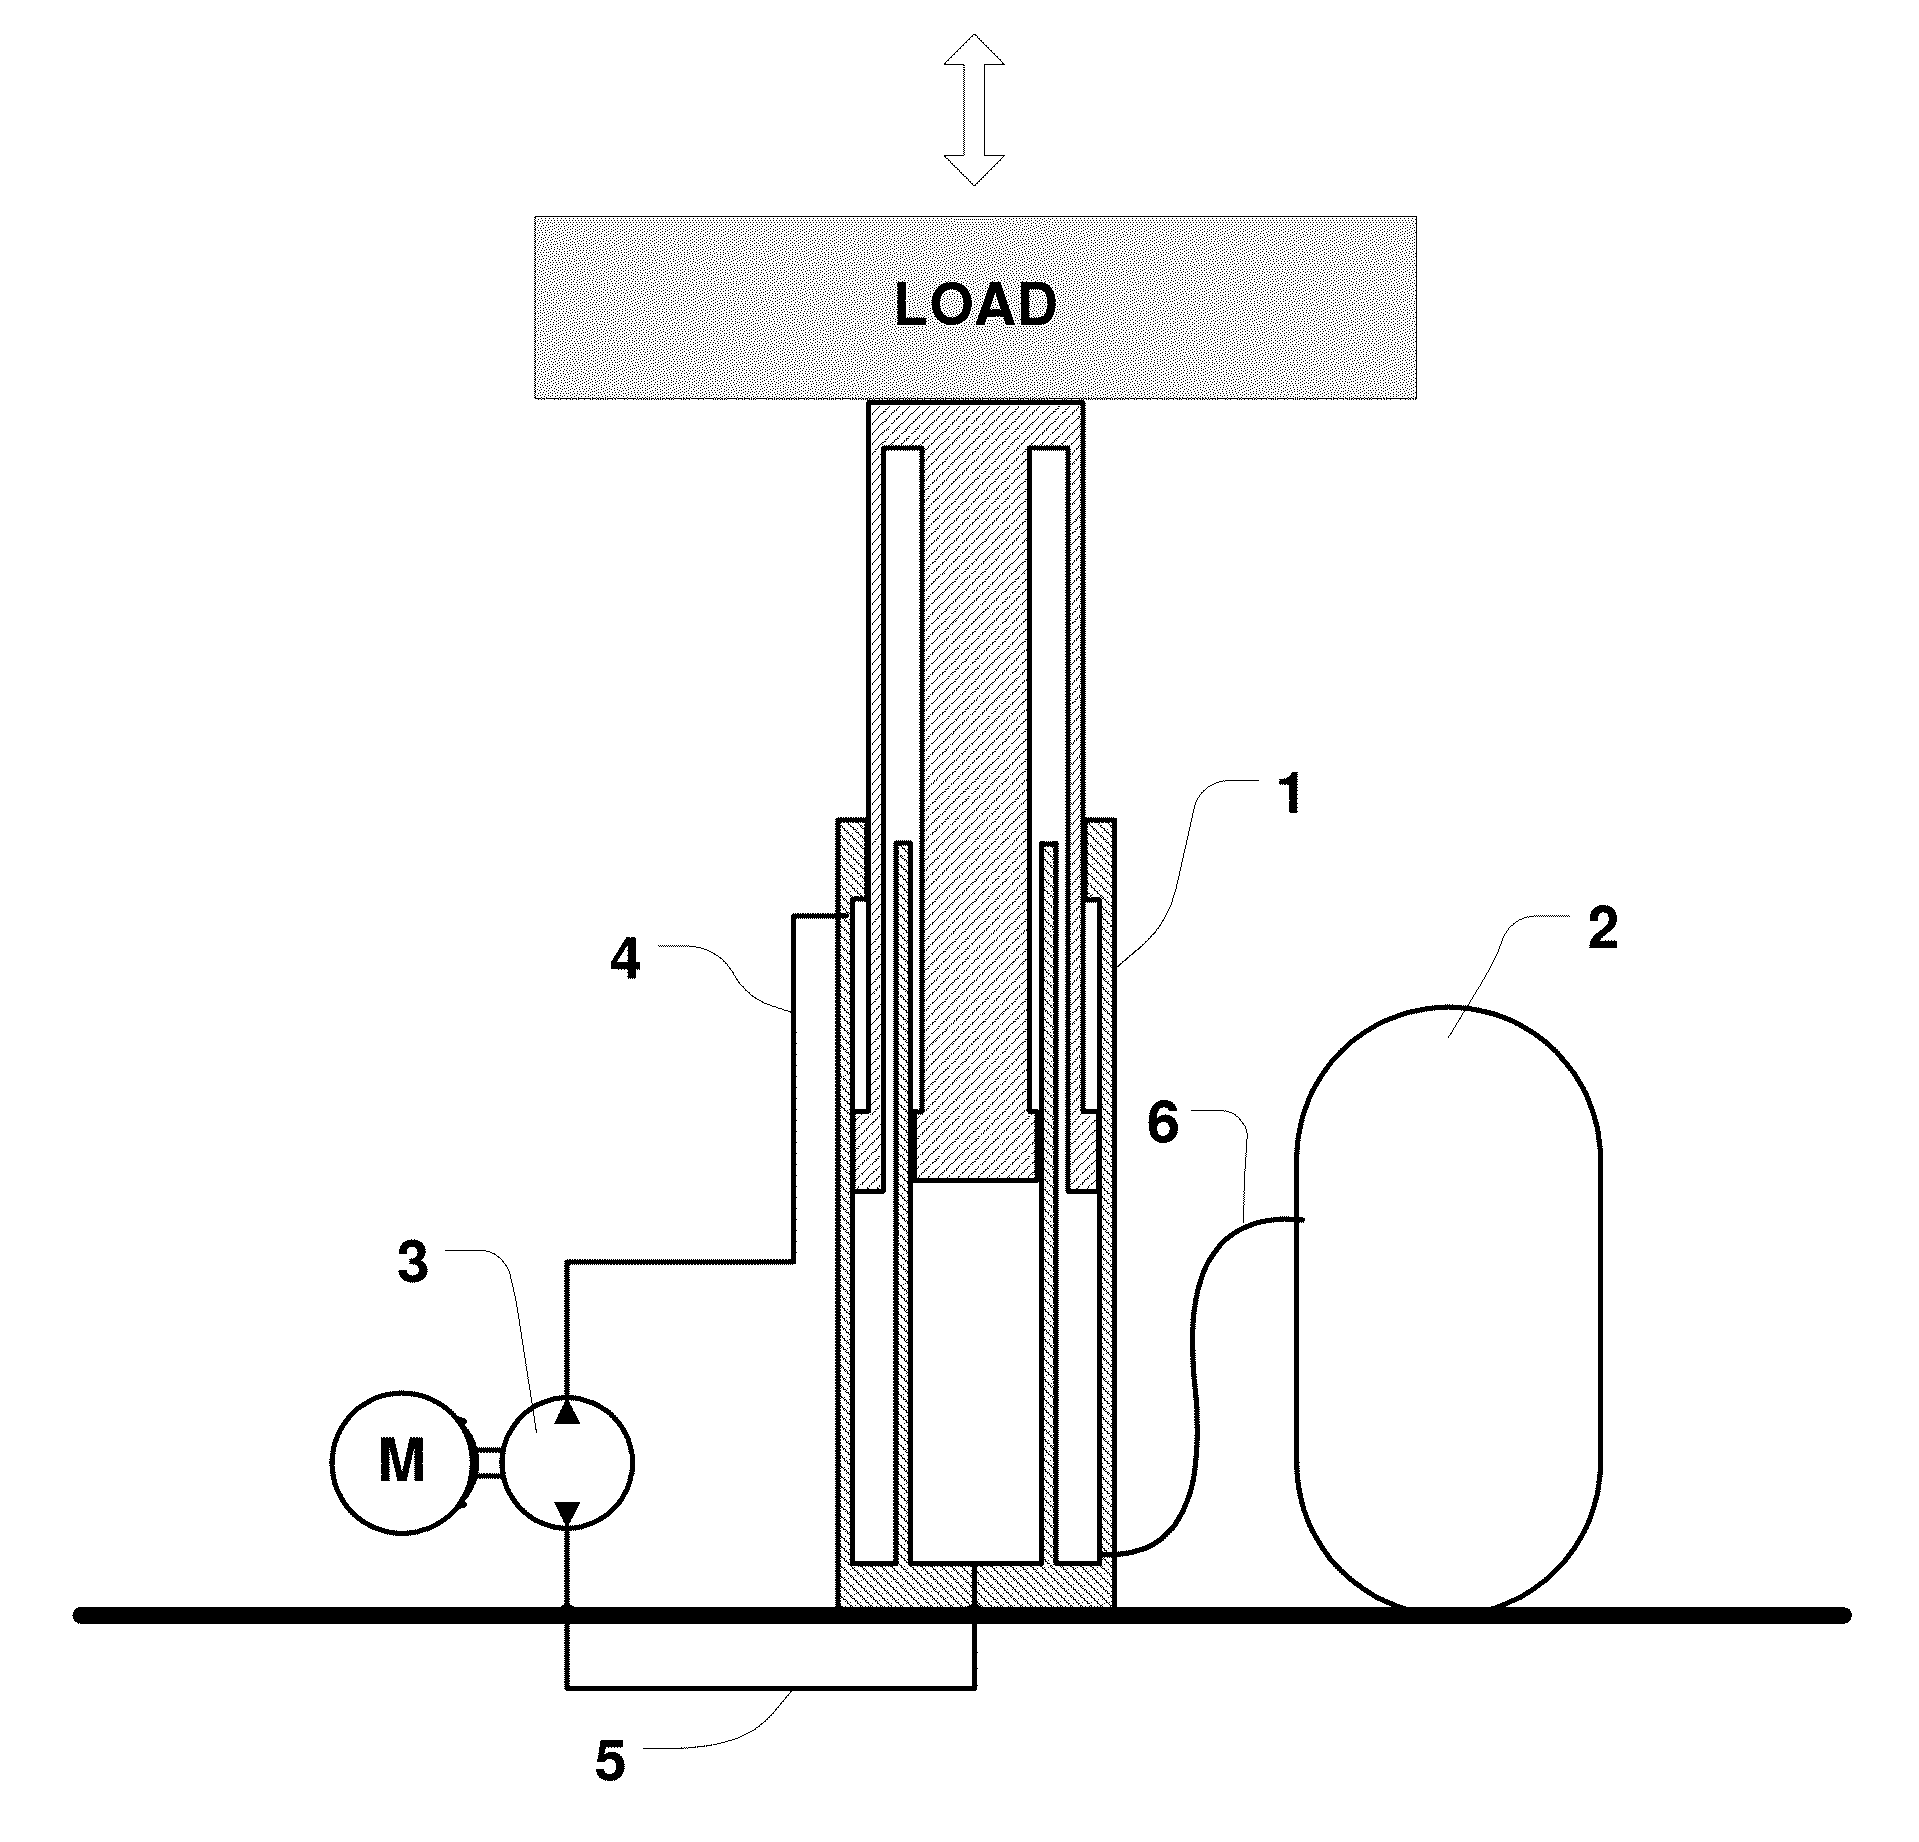 Hydro pneumatic lifting system and method